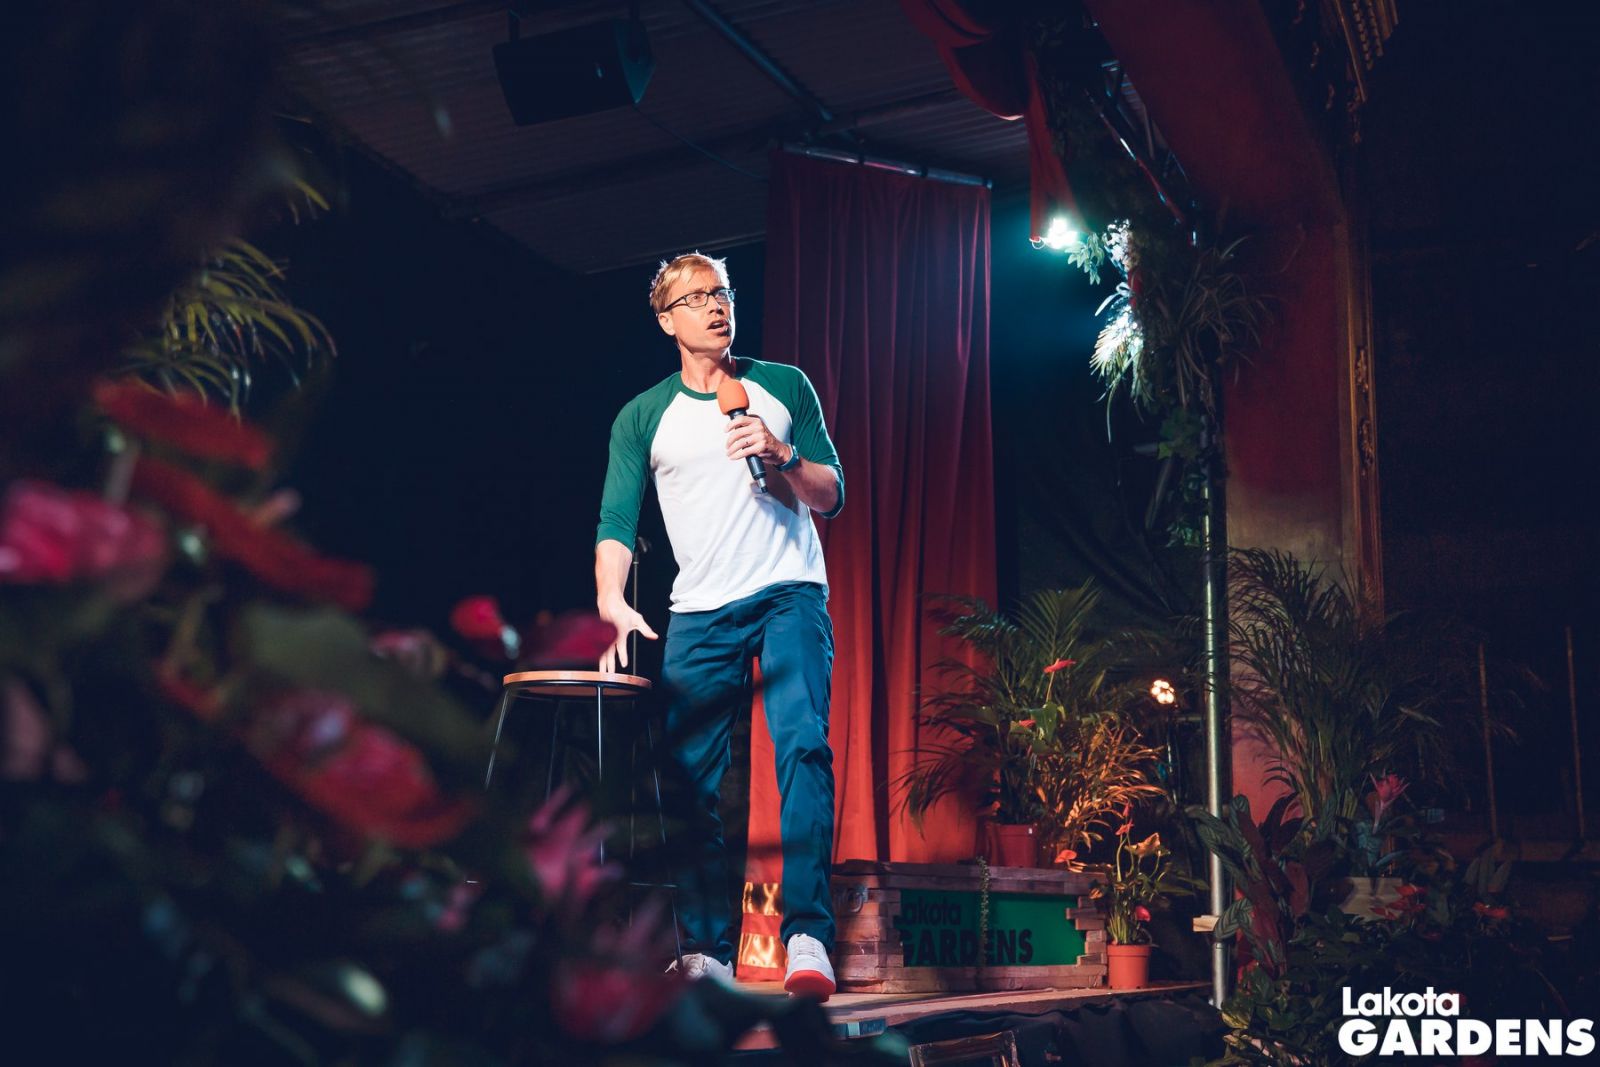 Russell Howard on stage at Lakota Gardens in 2020.